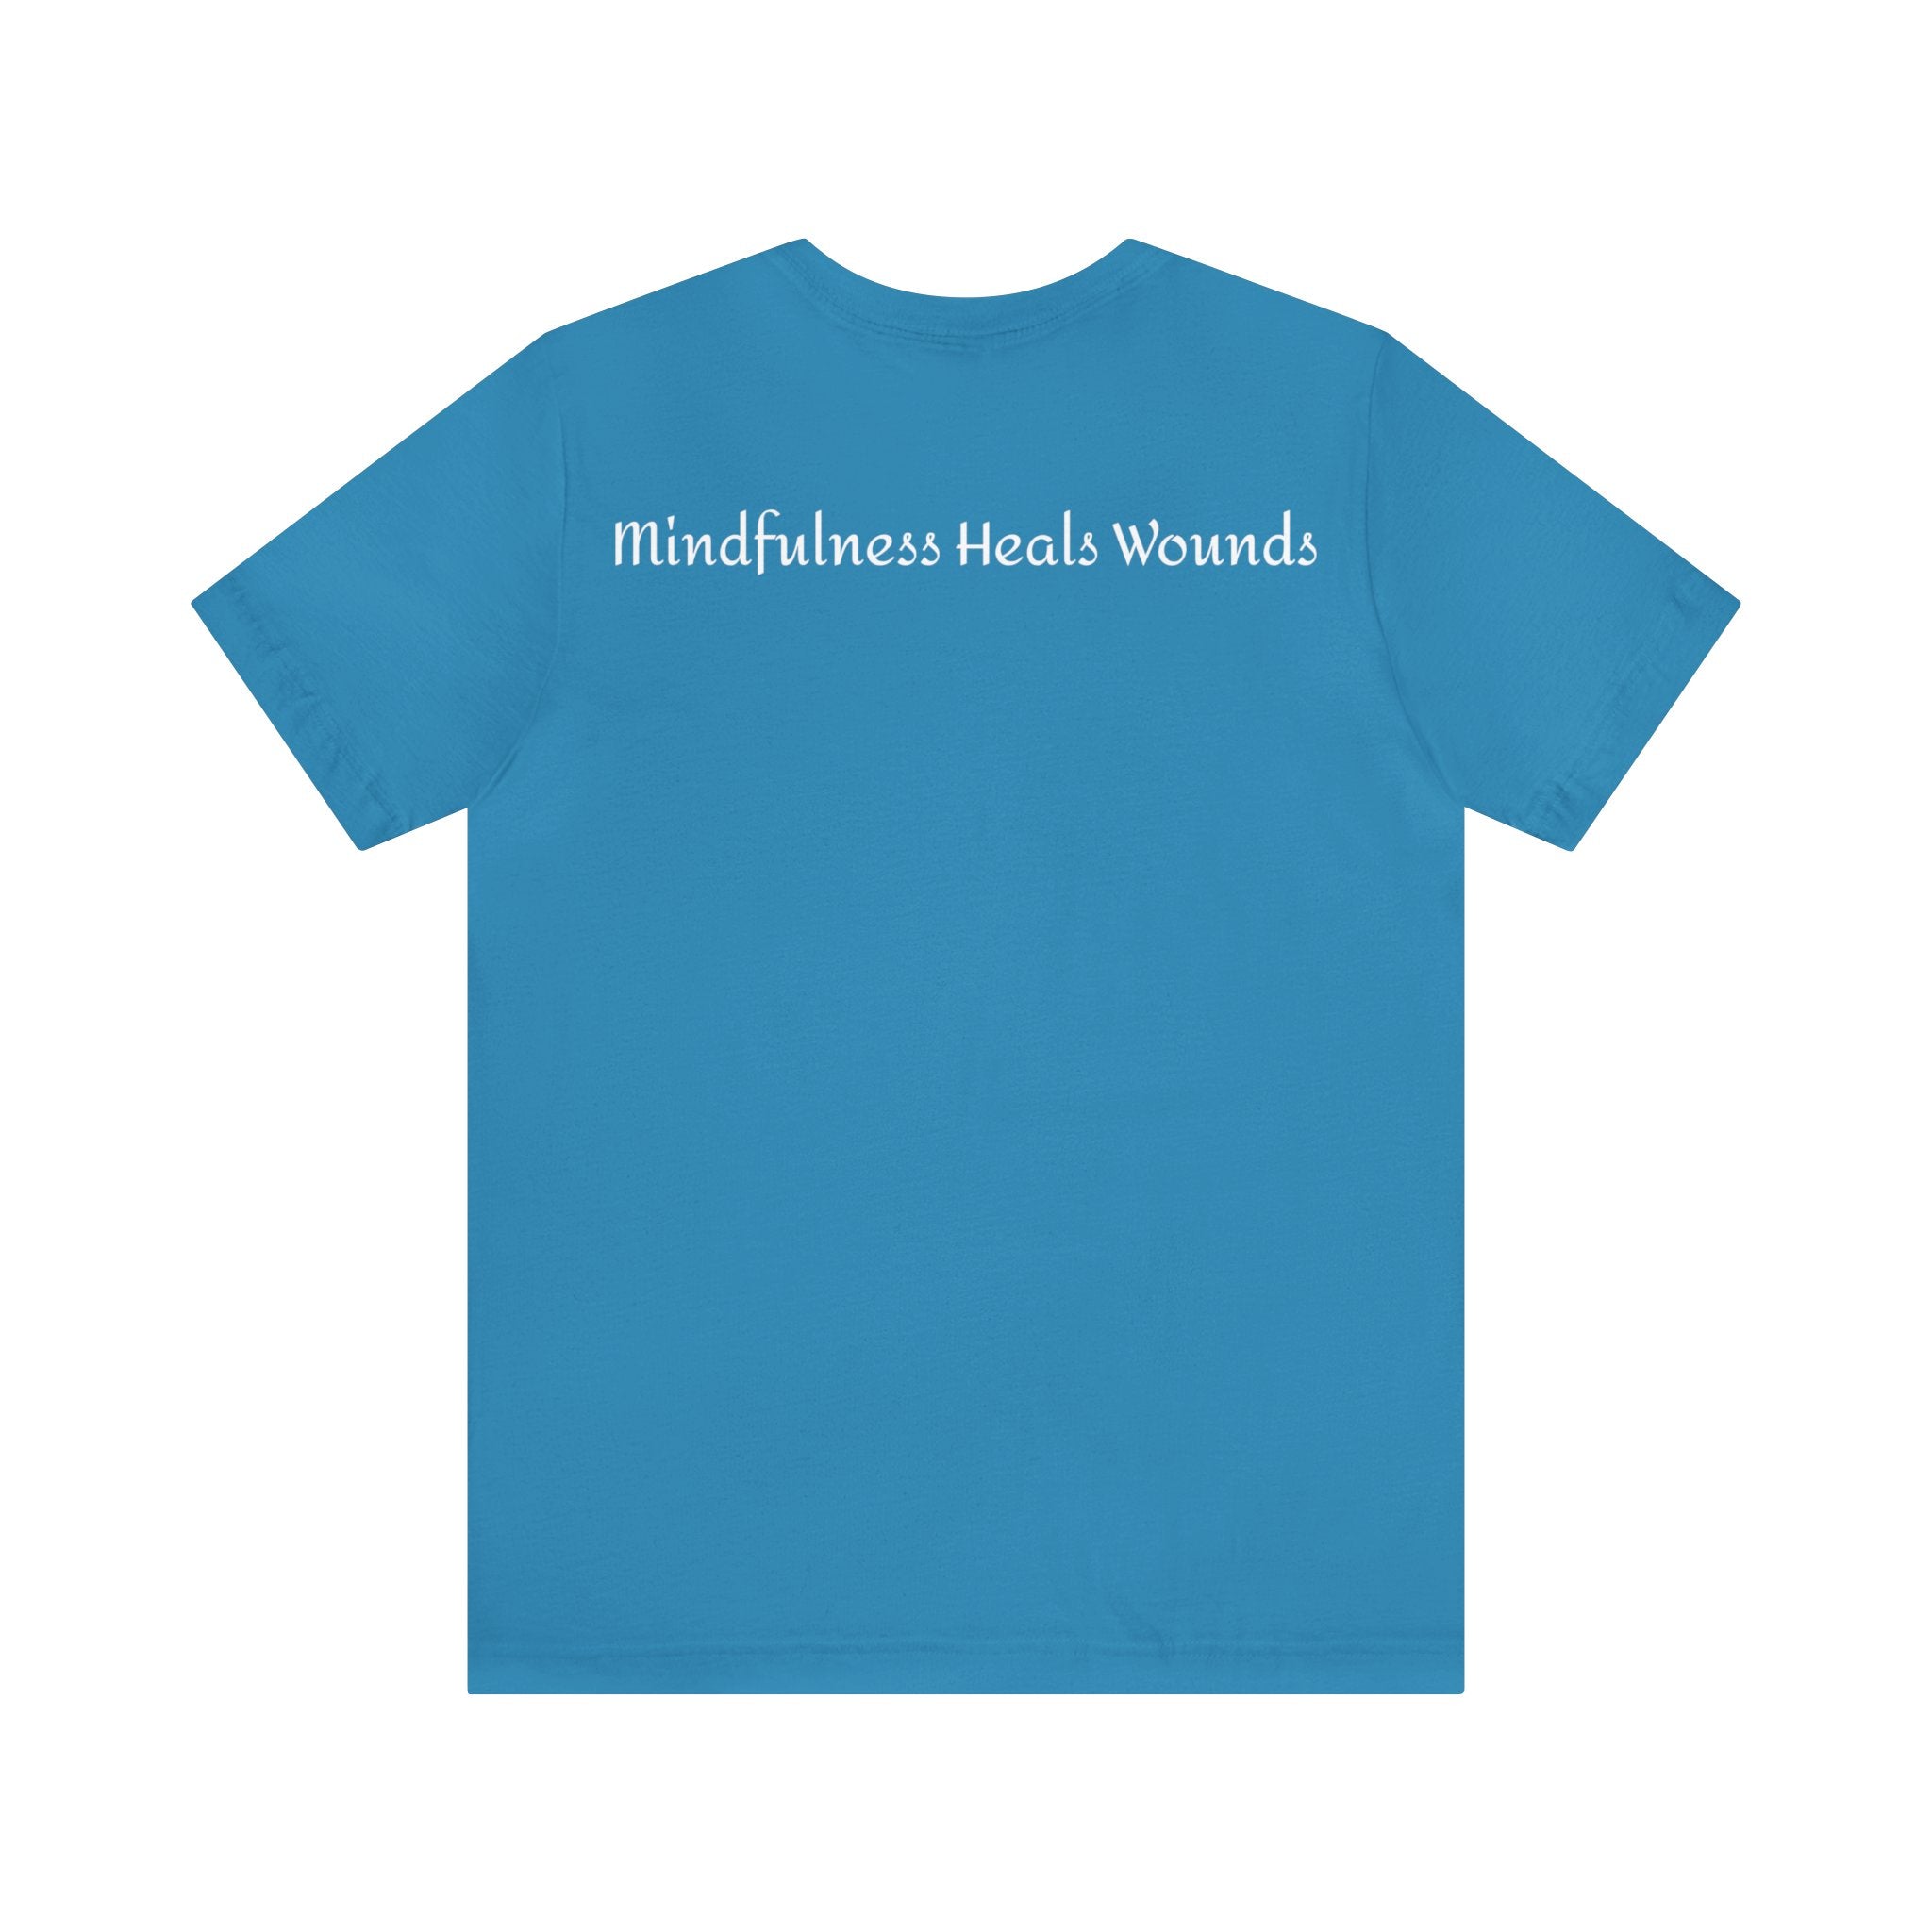 Mindfulness Heals Wounds Tee - Bella+Canvas 3001 Turquoise Airlume Cotton Bella+Canvas 3001 Crew Neckline Jersey Short Sleeve Lightweight Fabric Mental Health Support Retail Fit Tear-away Label Tee Unisex Tee T-Shirt 12087501884598920151_2048 Printify